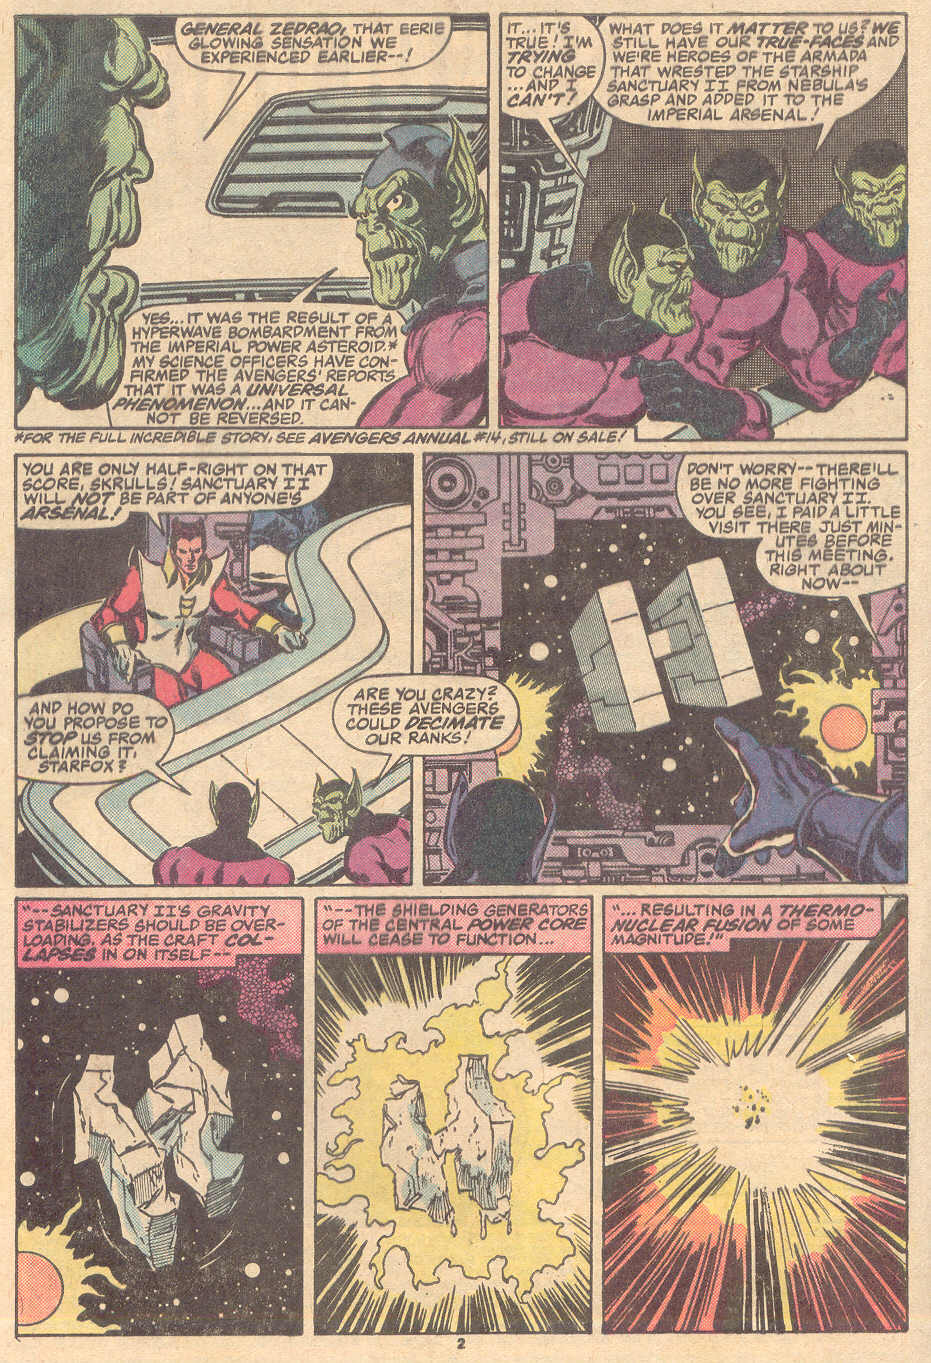 The Avengers (1963) 261 Page 2